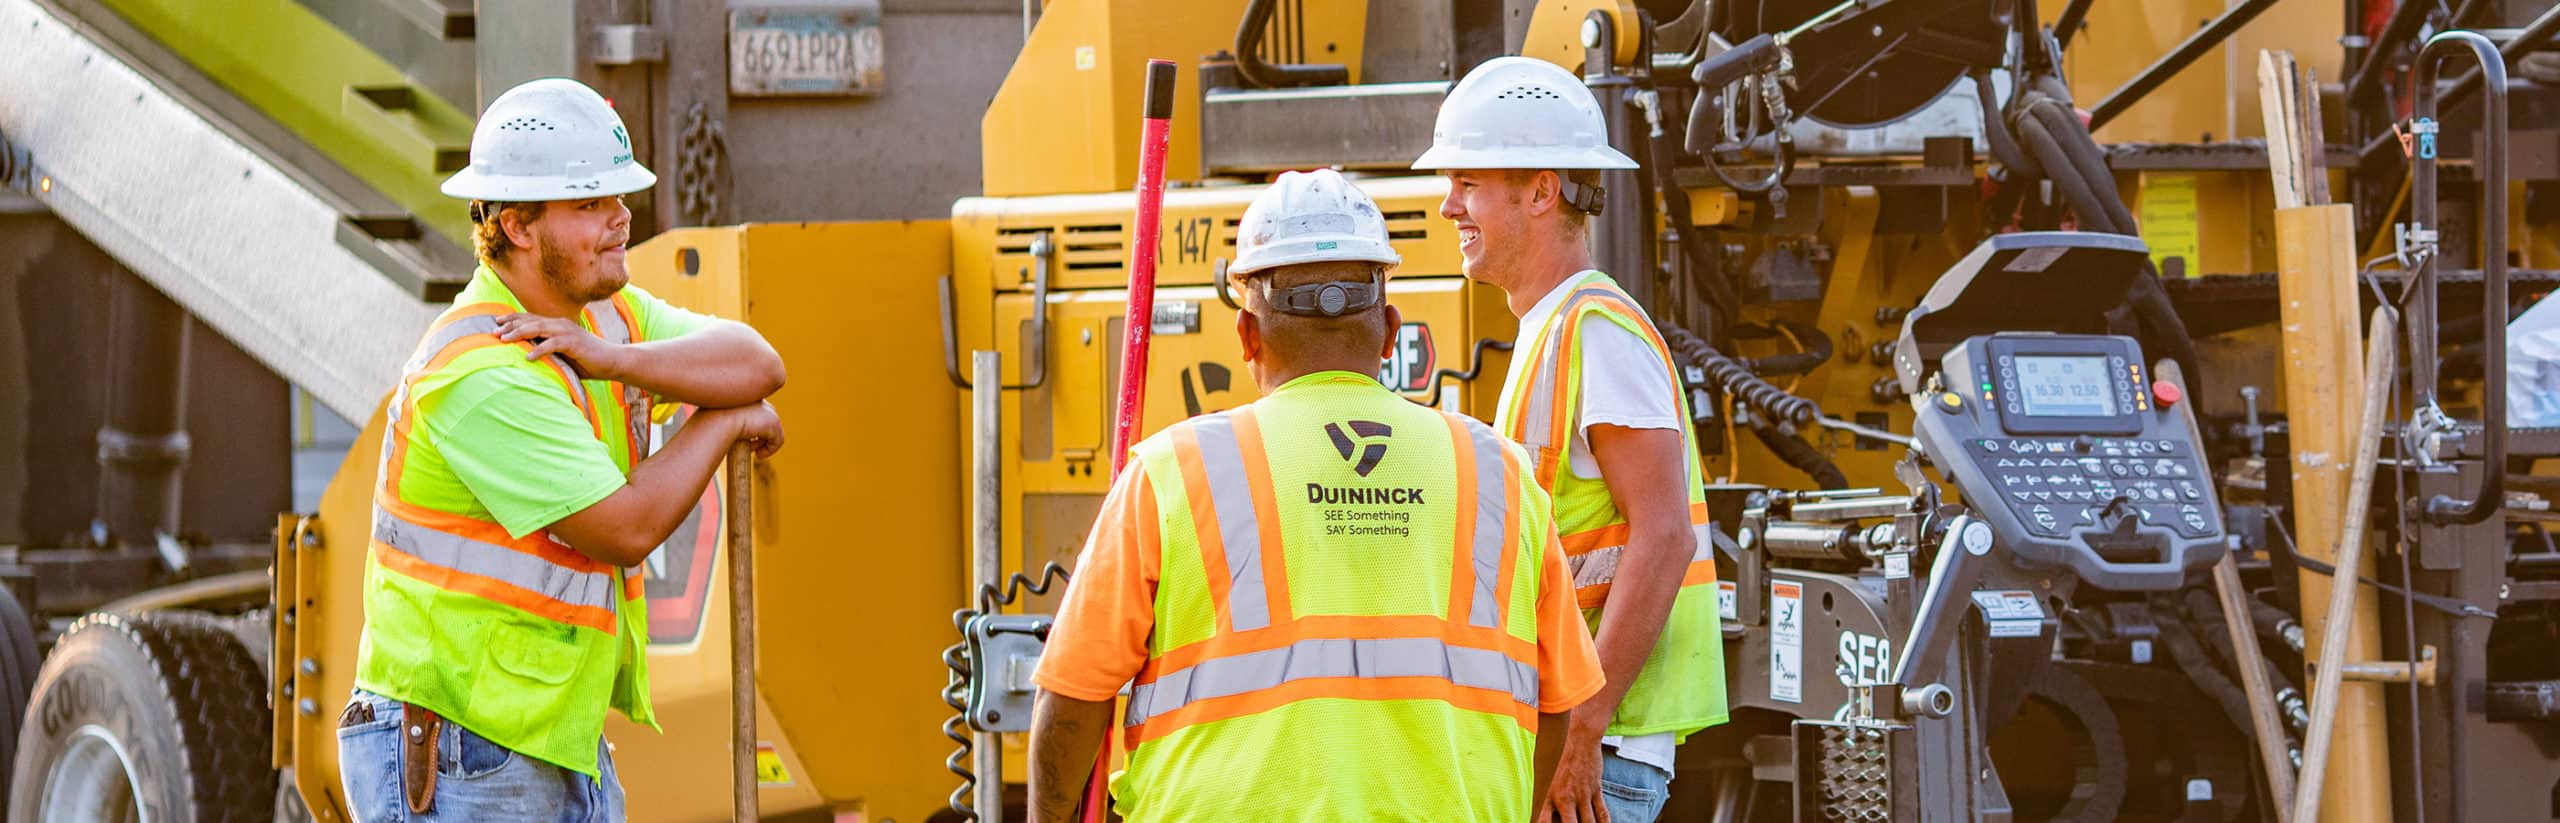 Three construction men smiling and talking on a commercial paving project.